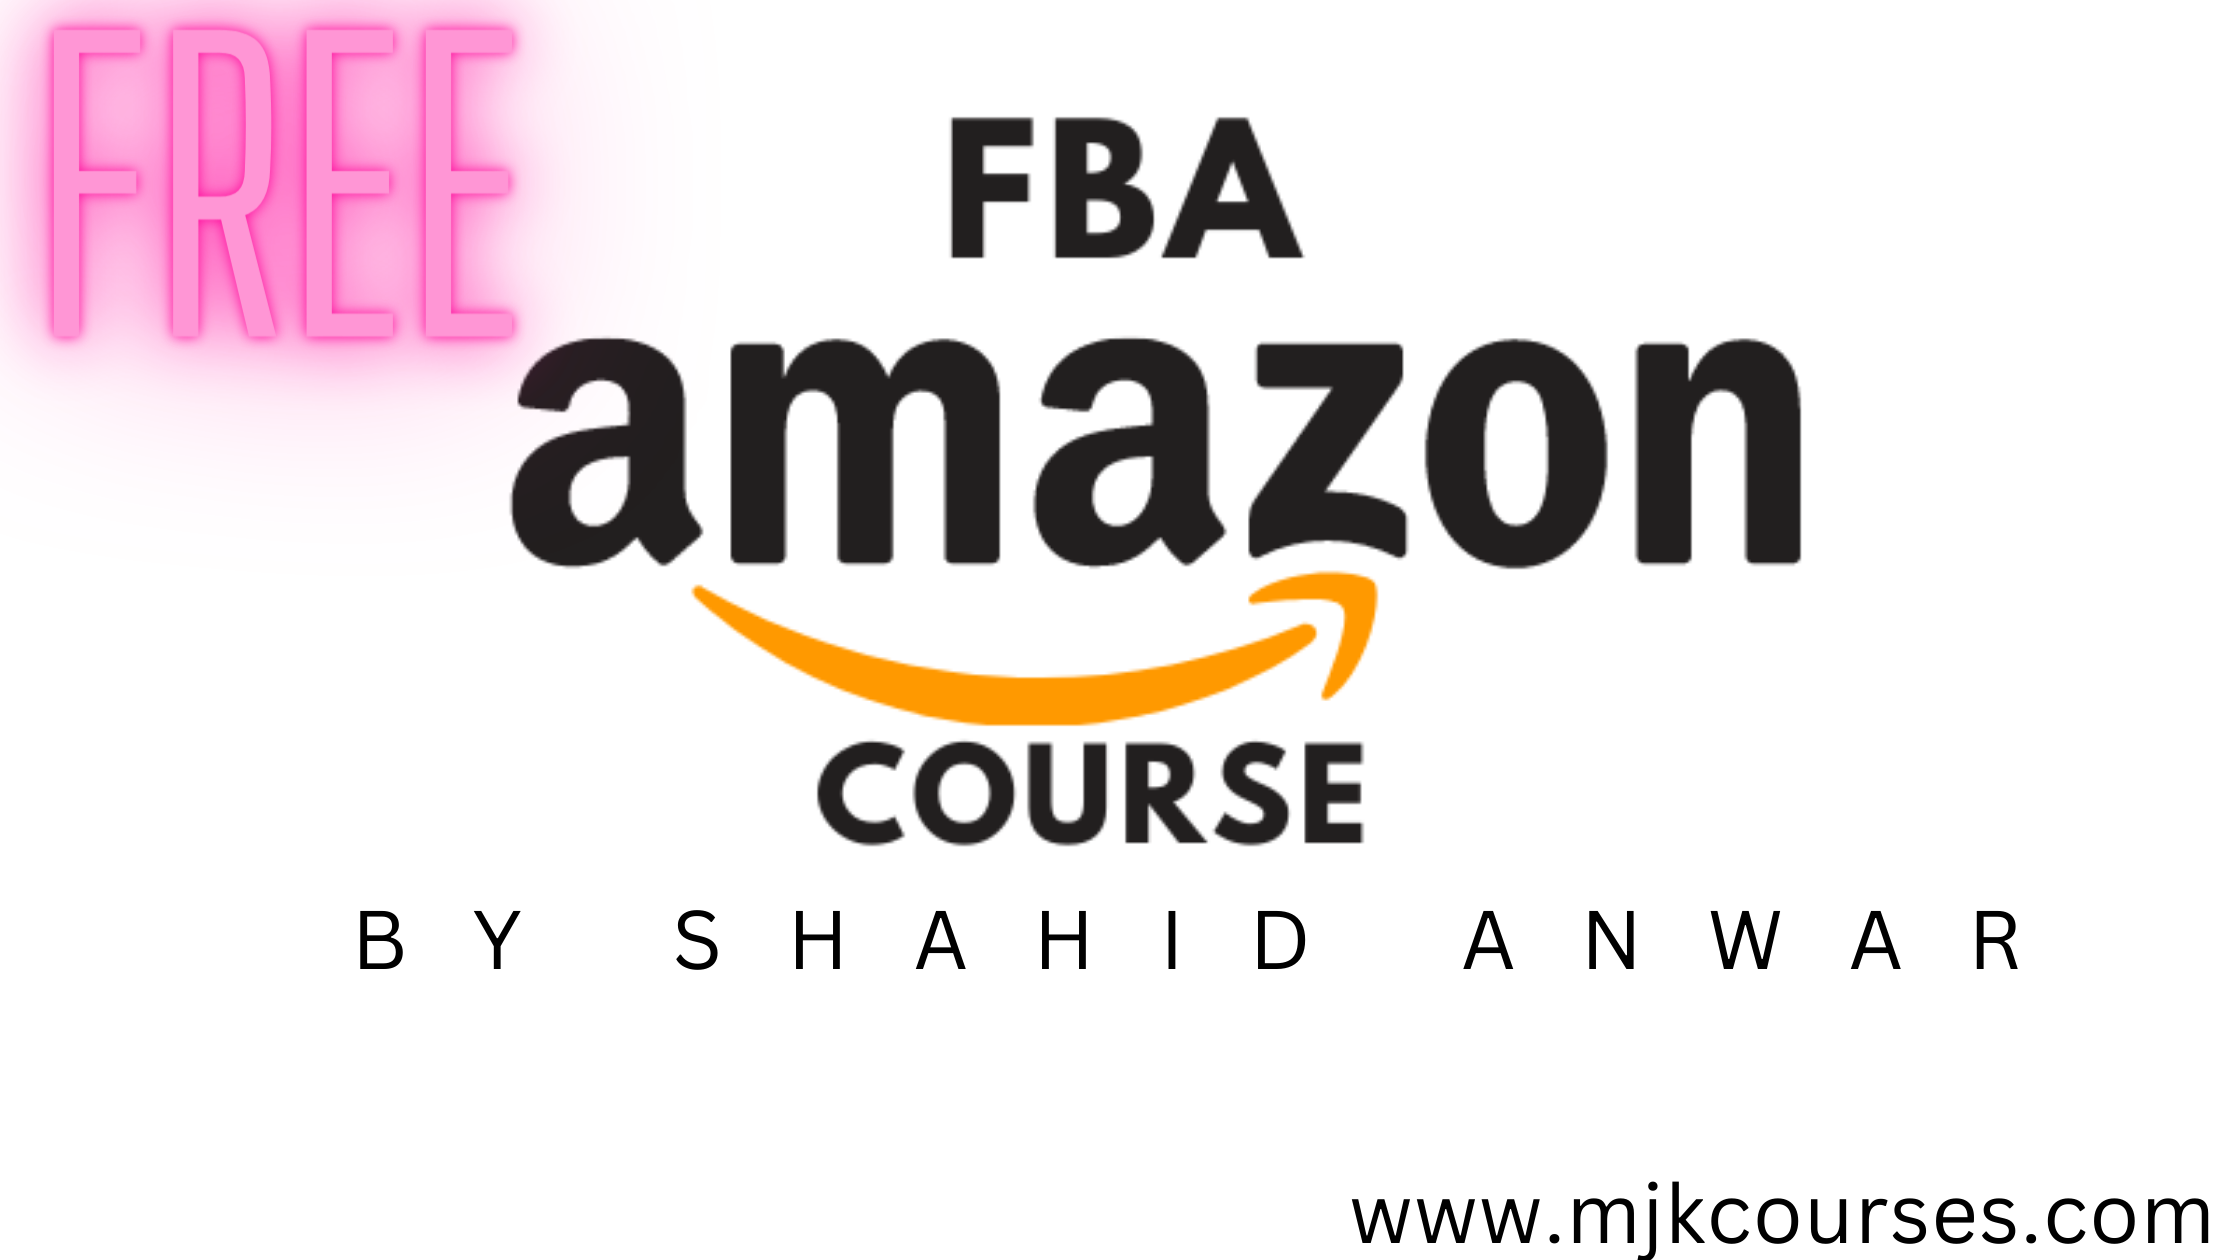 Shahid Anwar Course Free Download (/Dropshipping)